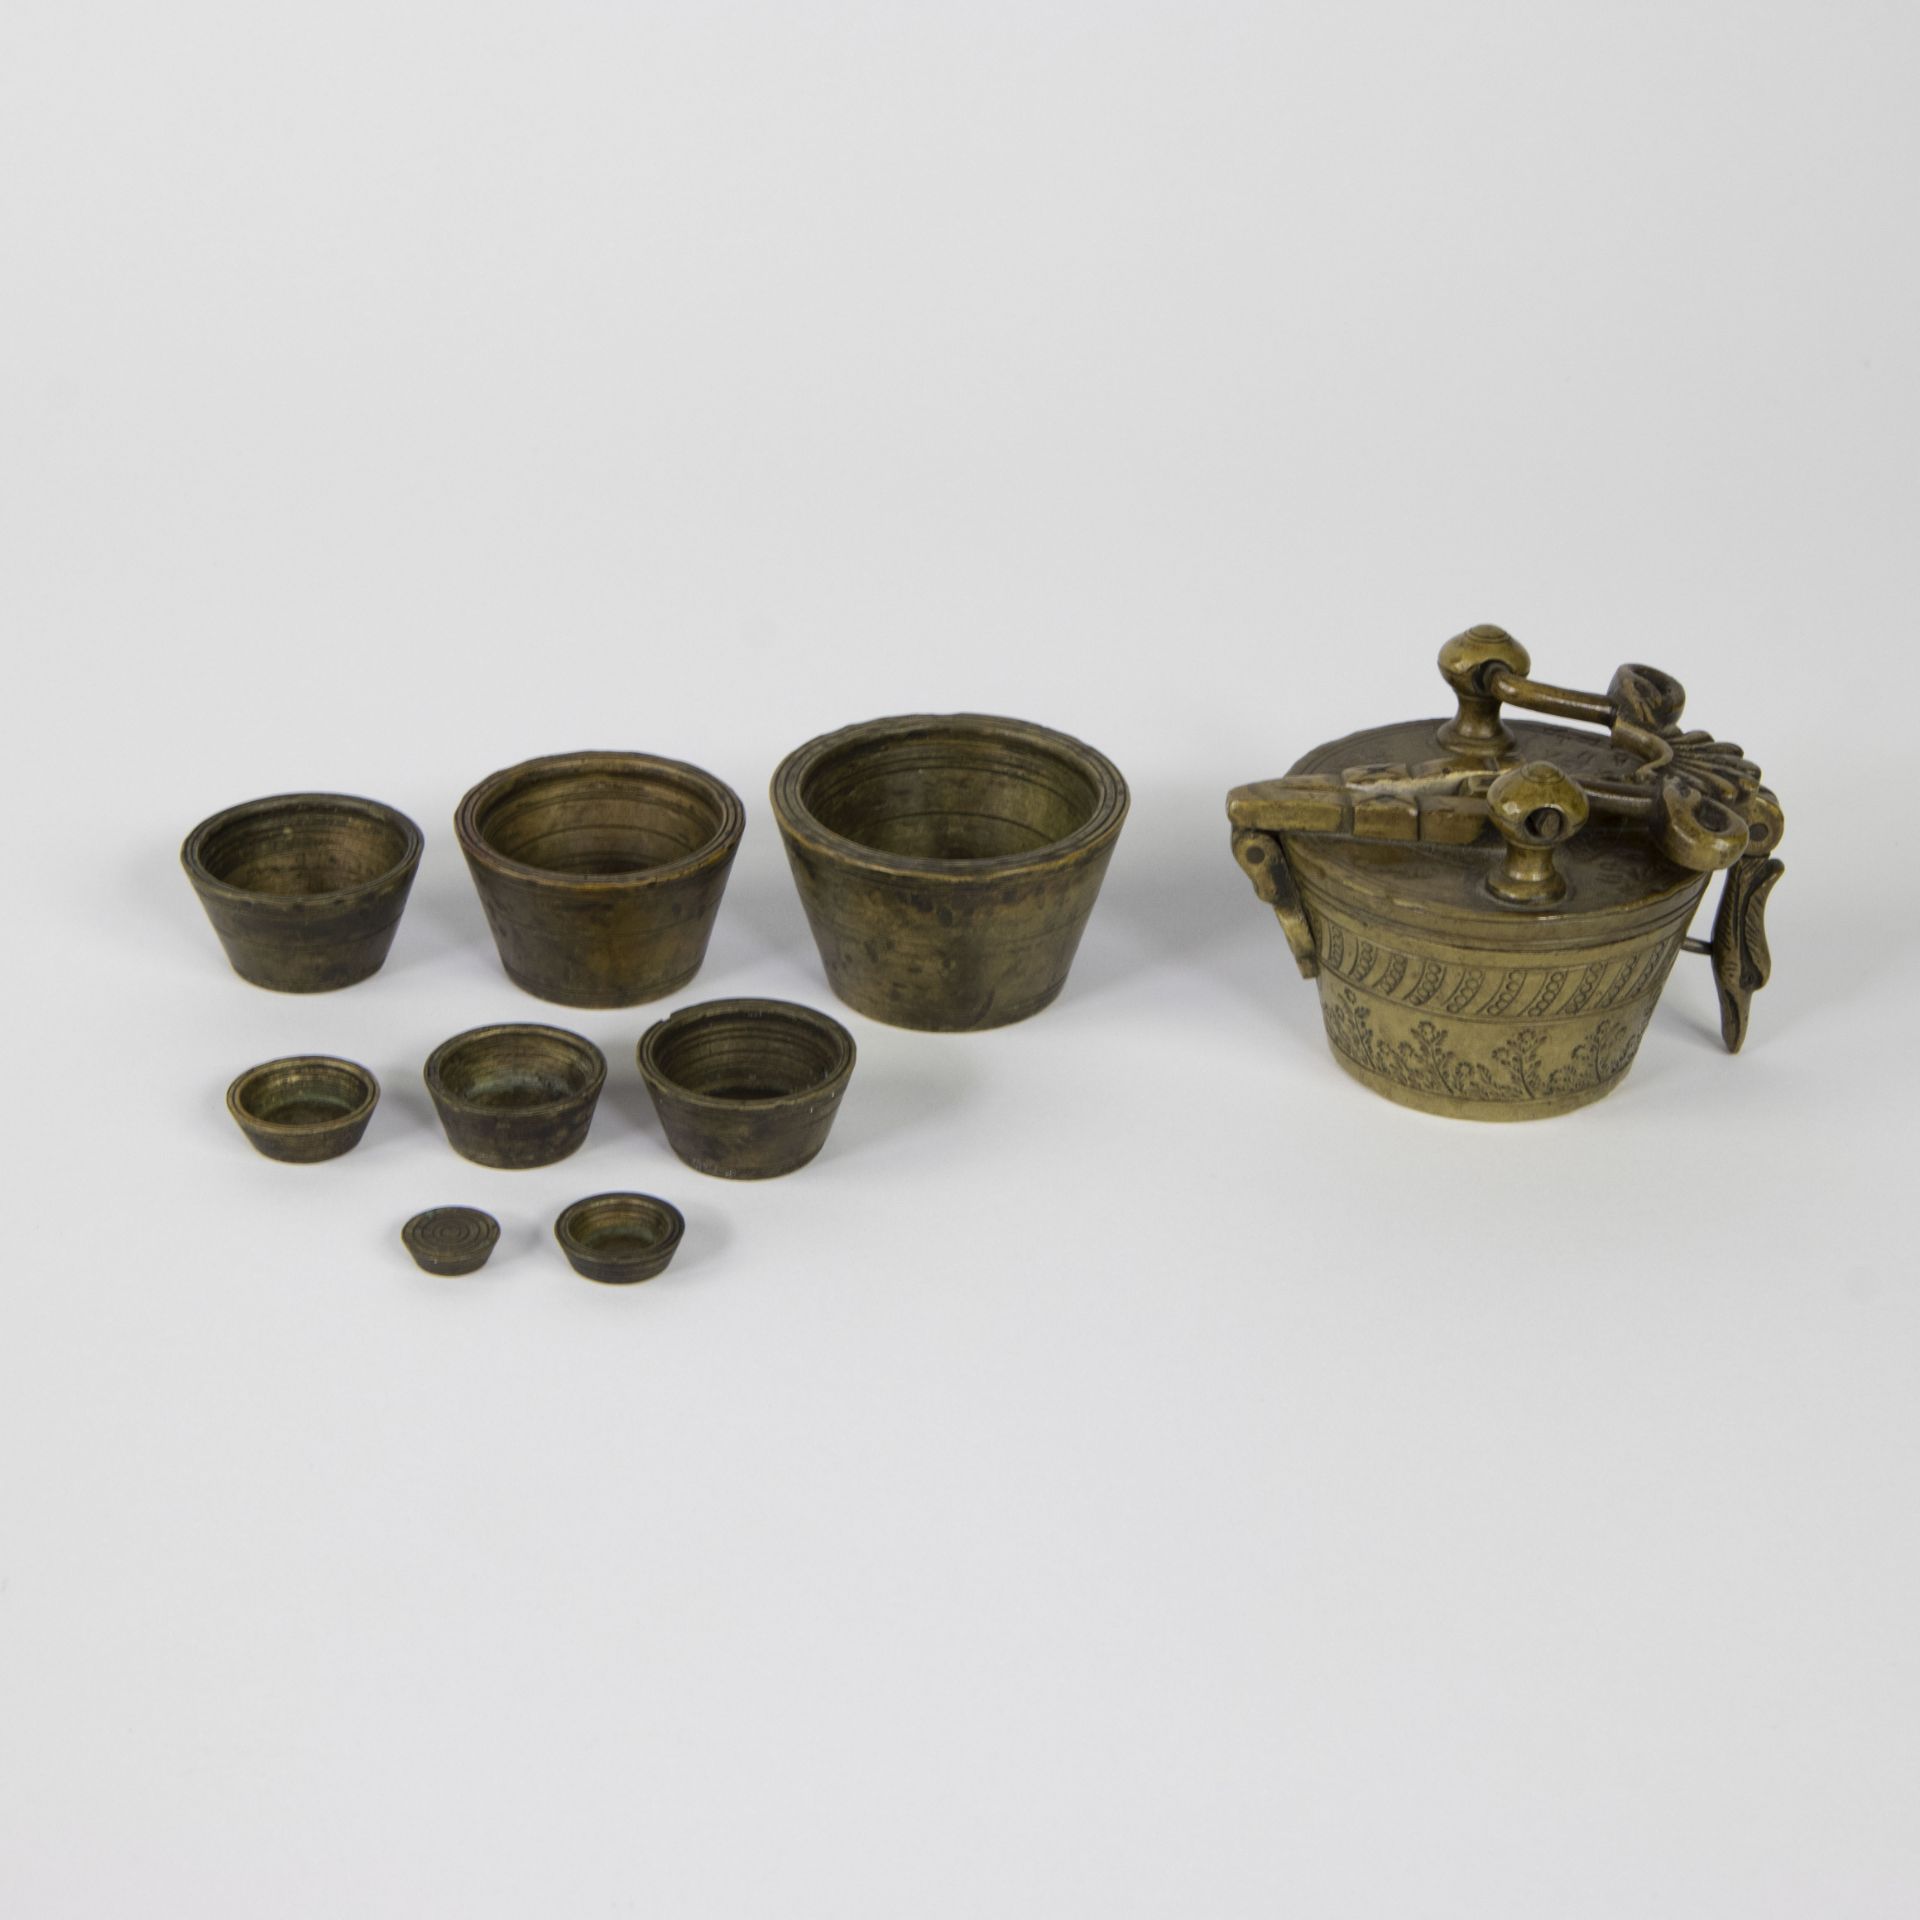 Lot of 4 bronze mortars with 2 pestle and 2 8-piece closing weights German 1836 and 1704 (marked) - Bild 6 aus 8